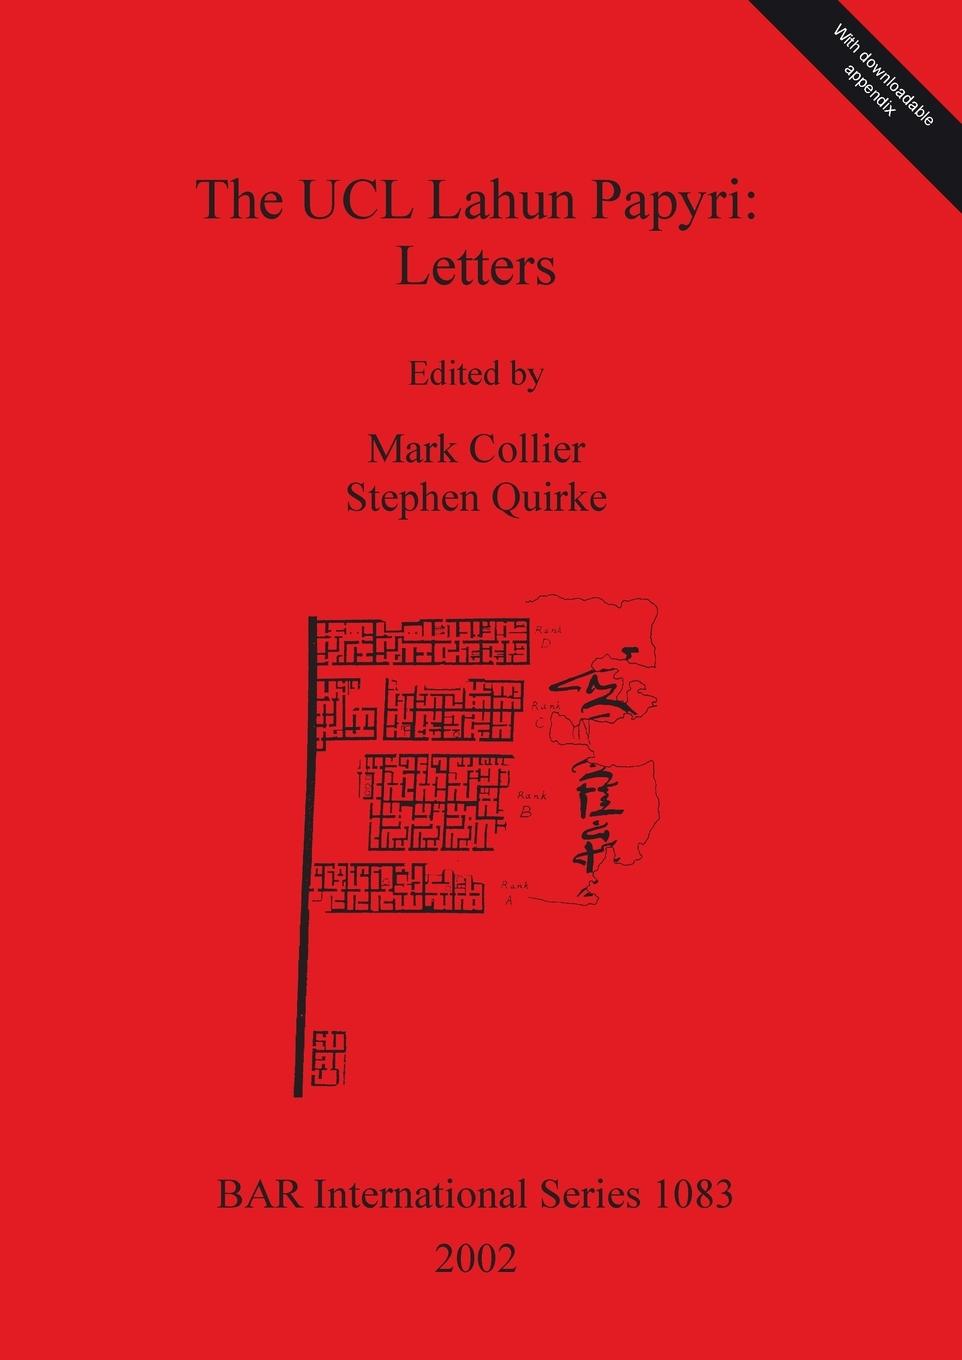 The UCL Lahun Papyri - Collier, Mark; Quirke, Stephen